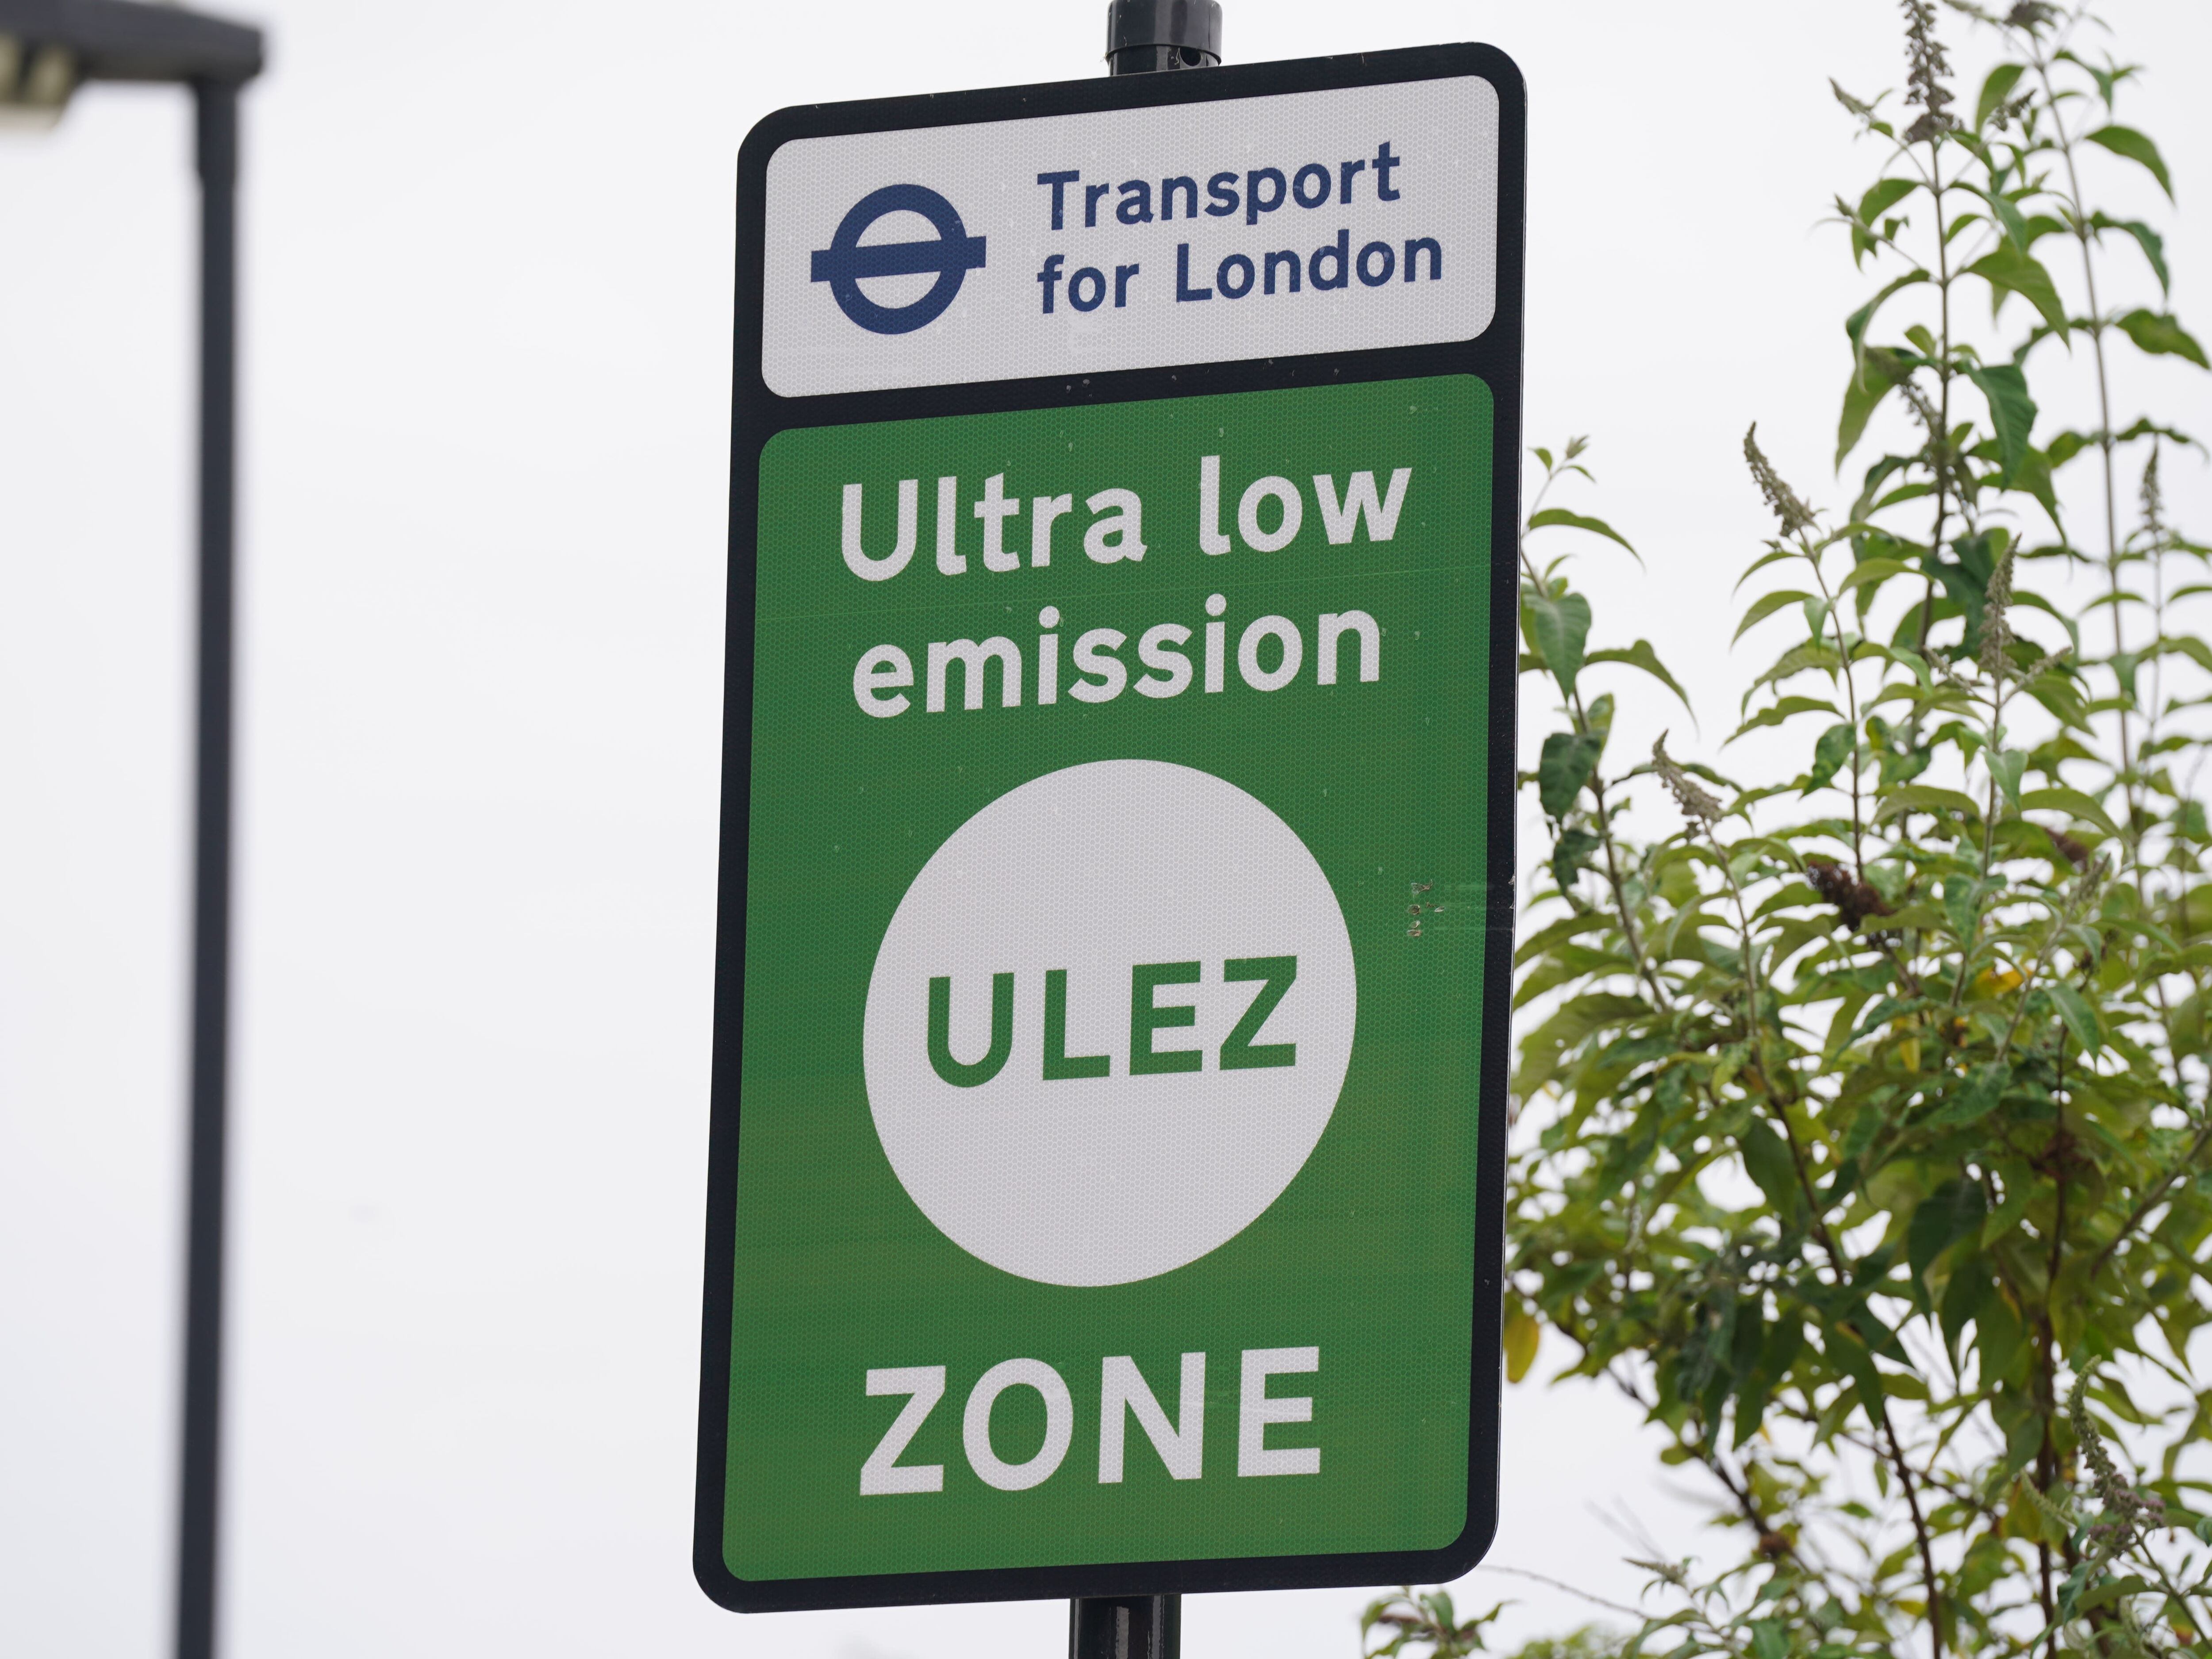 London mayor rules out expansion of Ulez if he stays in role after election